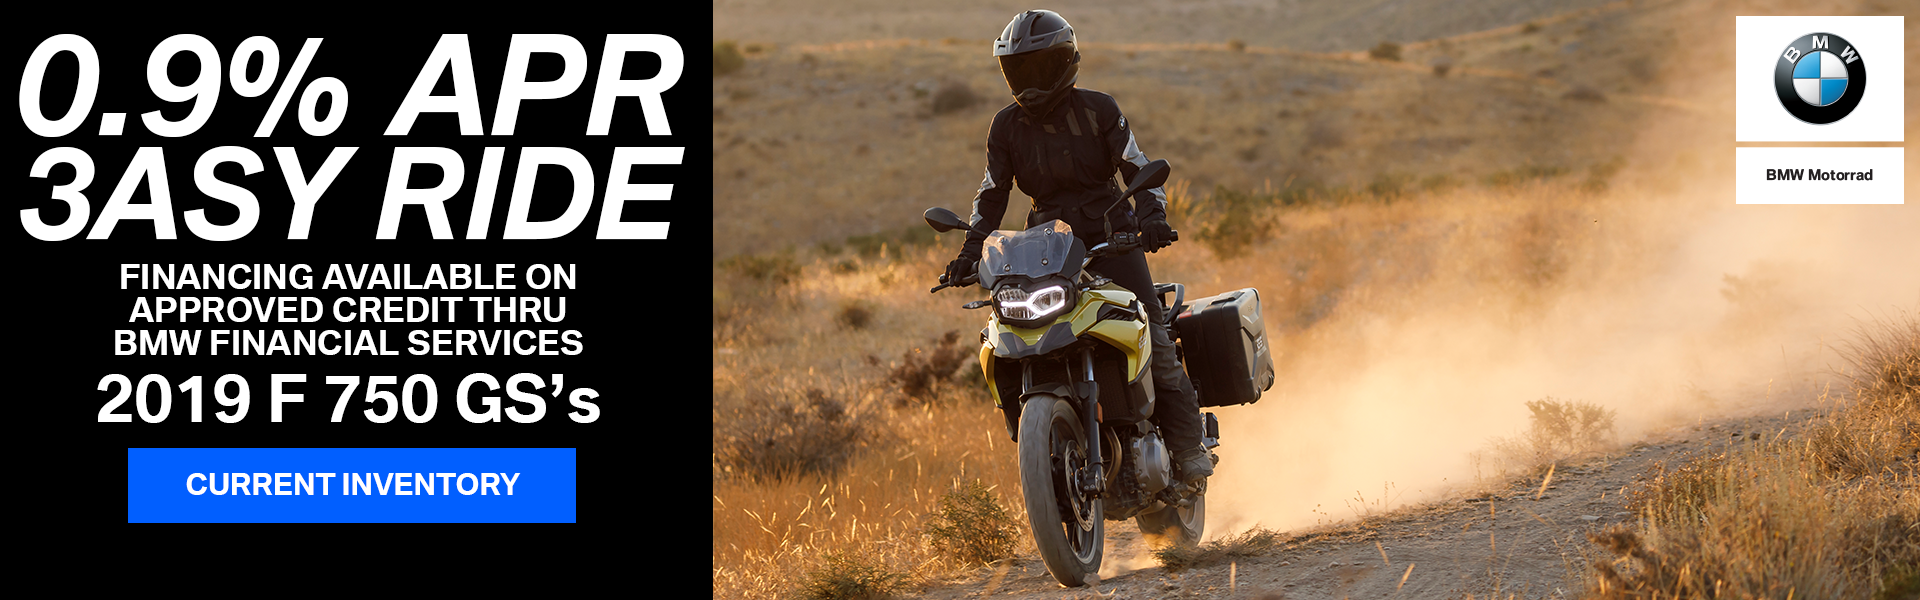 New Motorcycles and Service | BMW Motorcycles of San Francisco